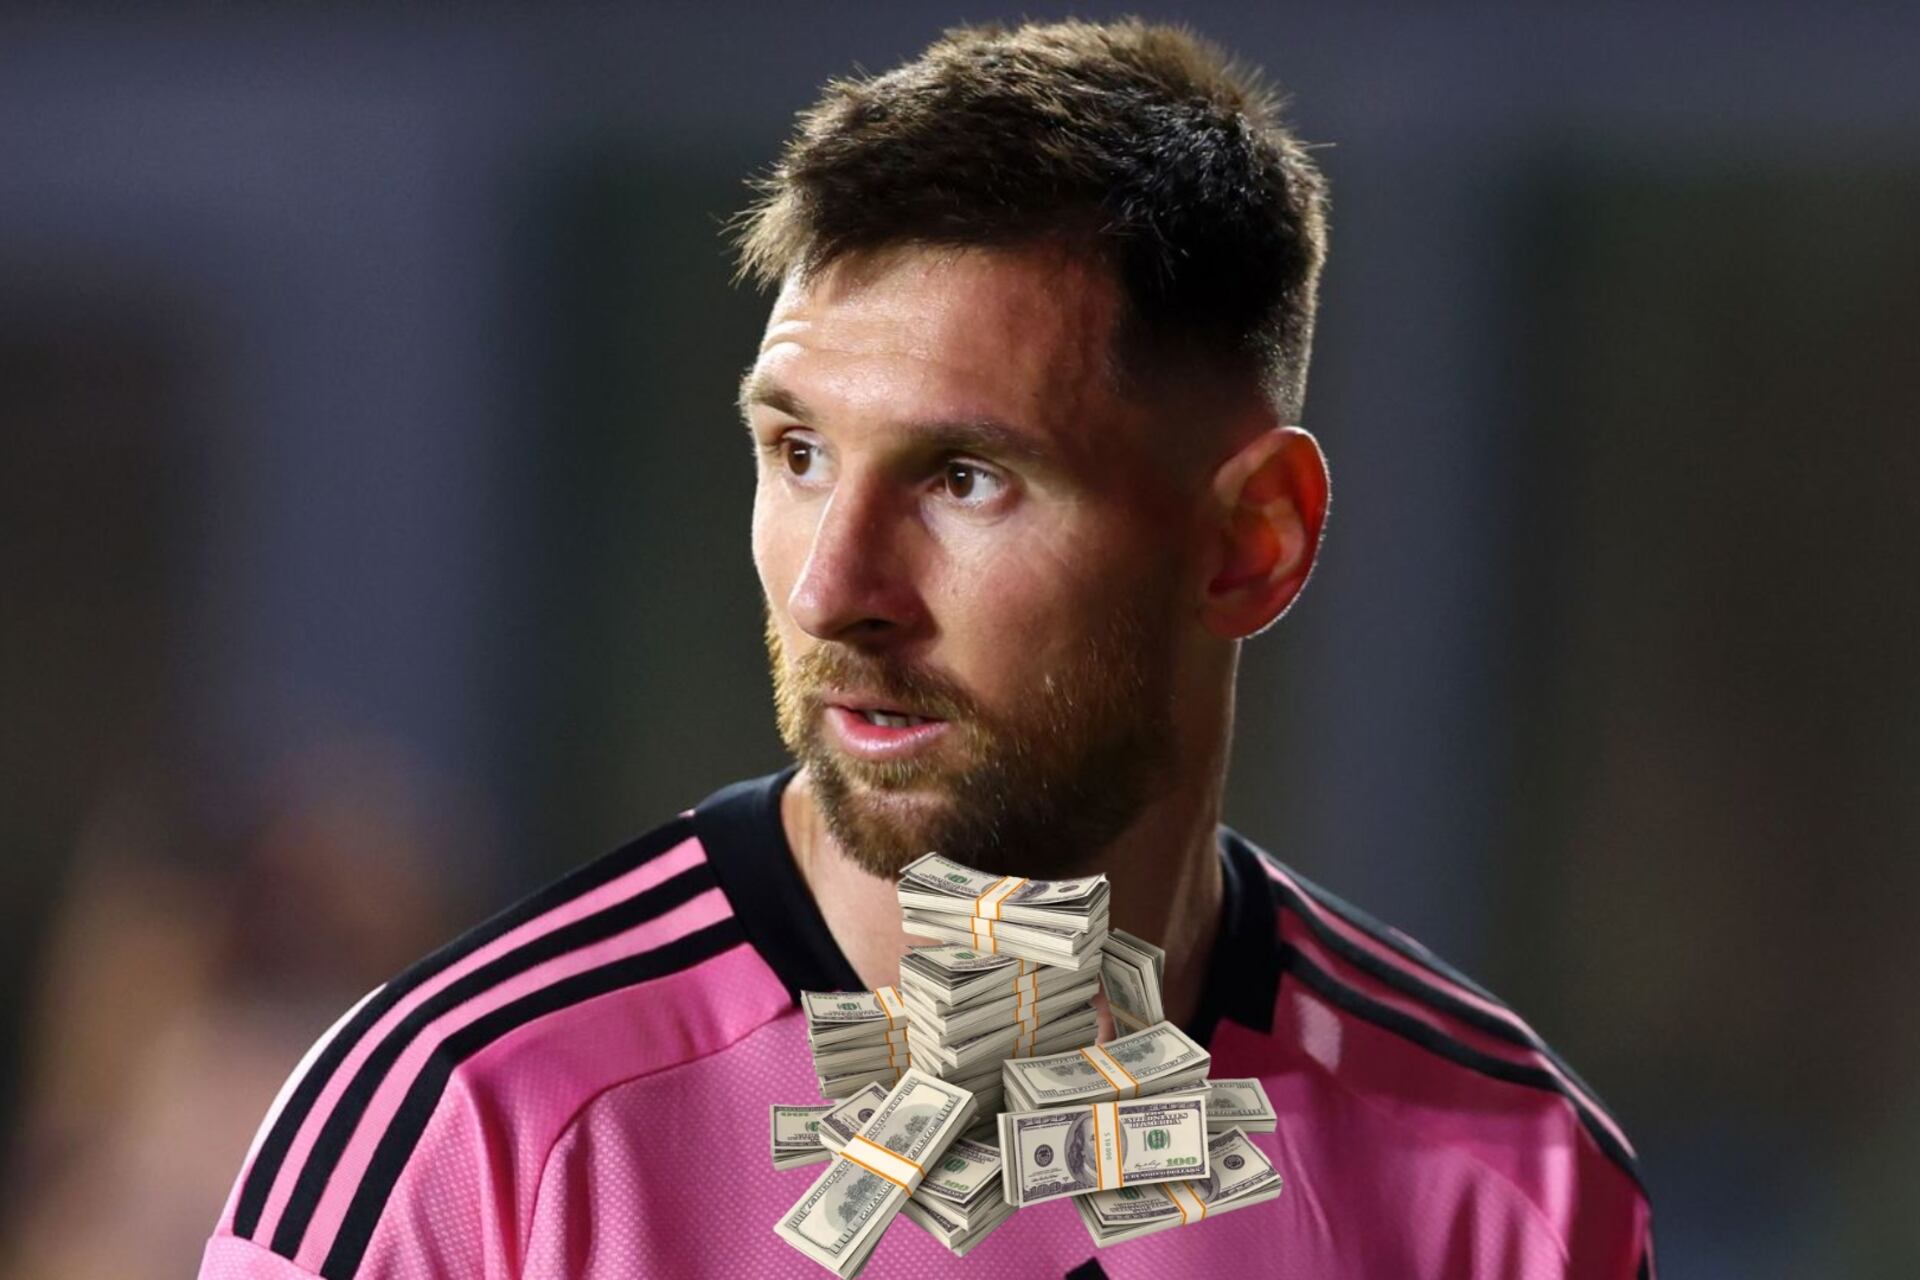 Messi's new investment that costed $50M and all his fans around the world will want to experience